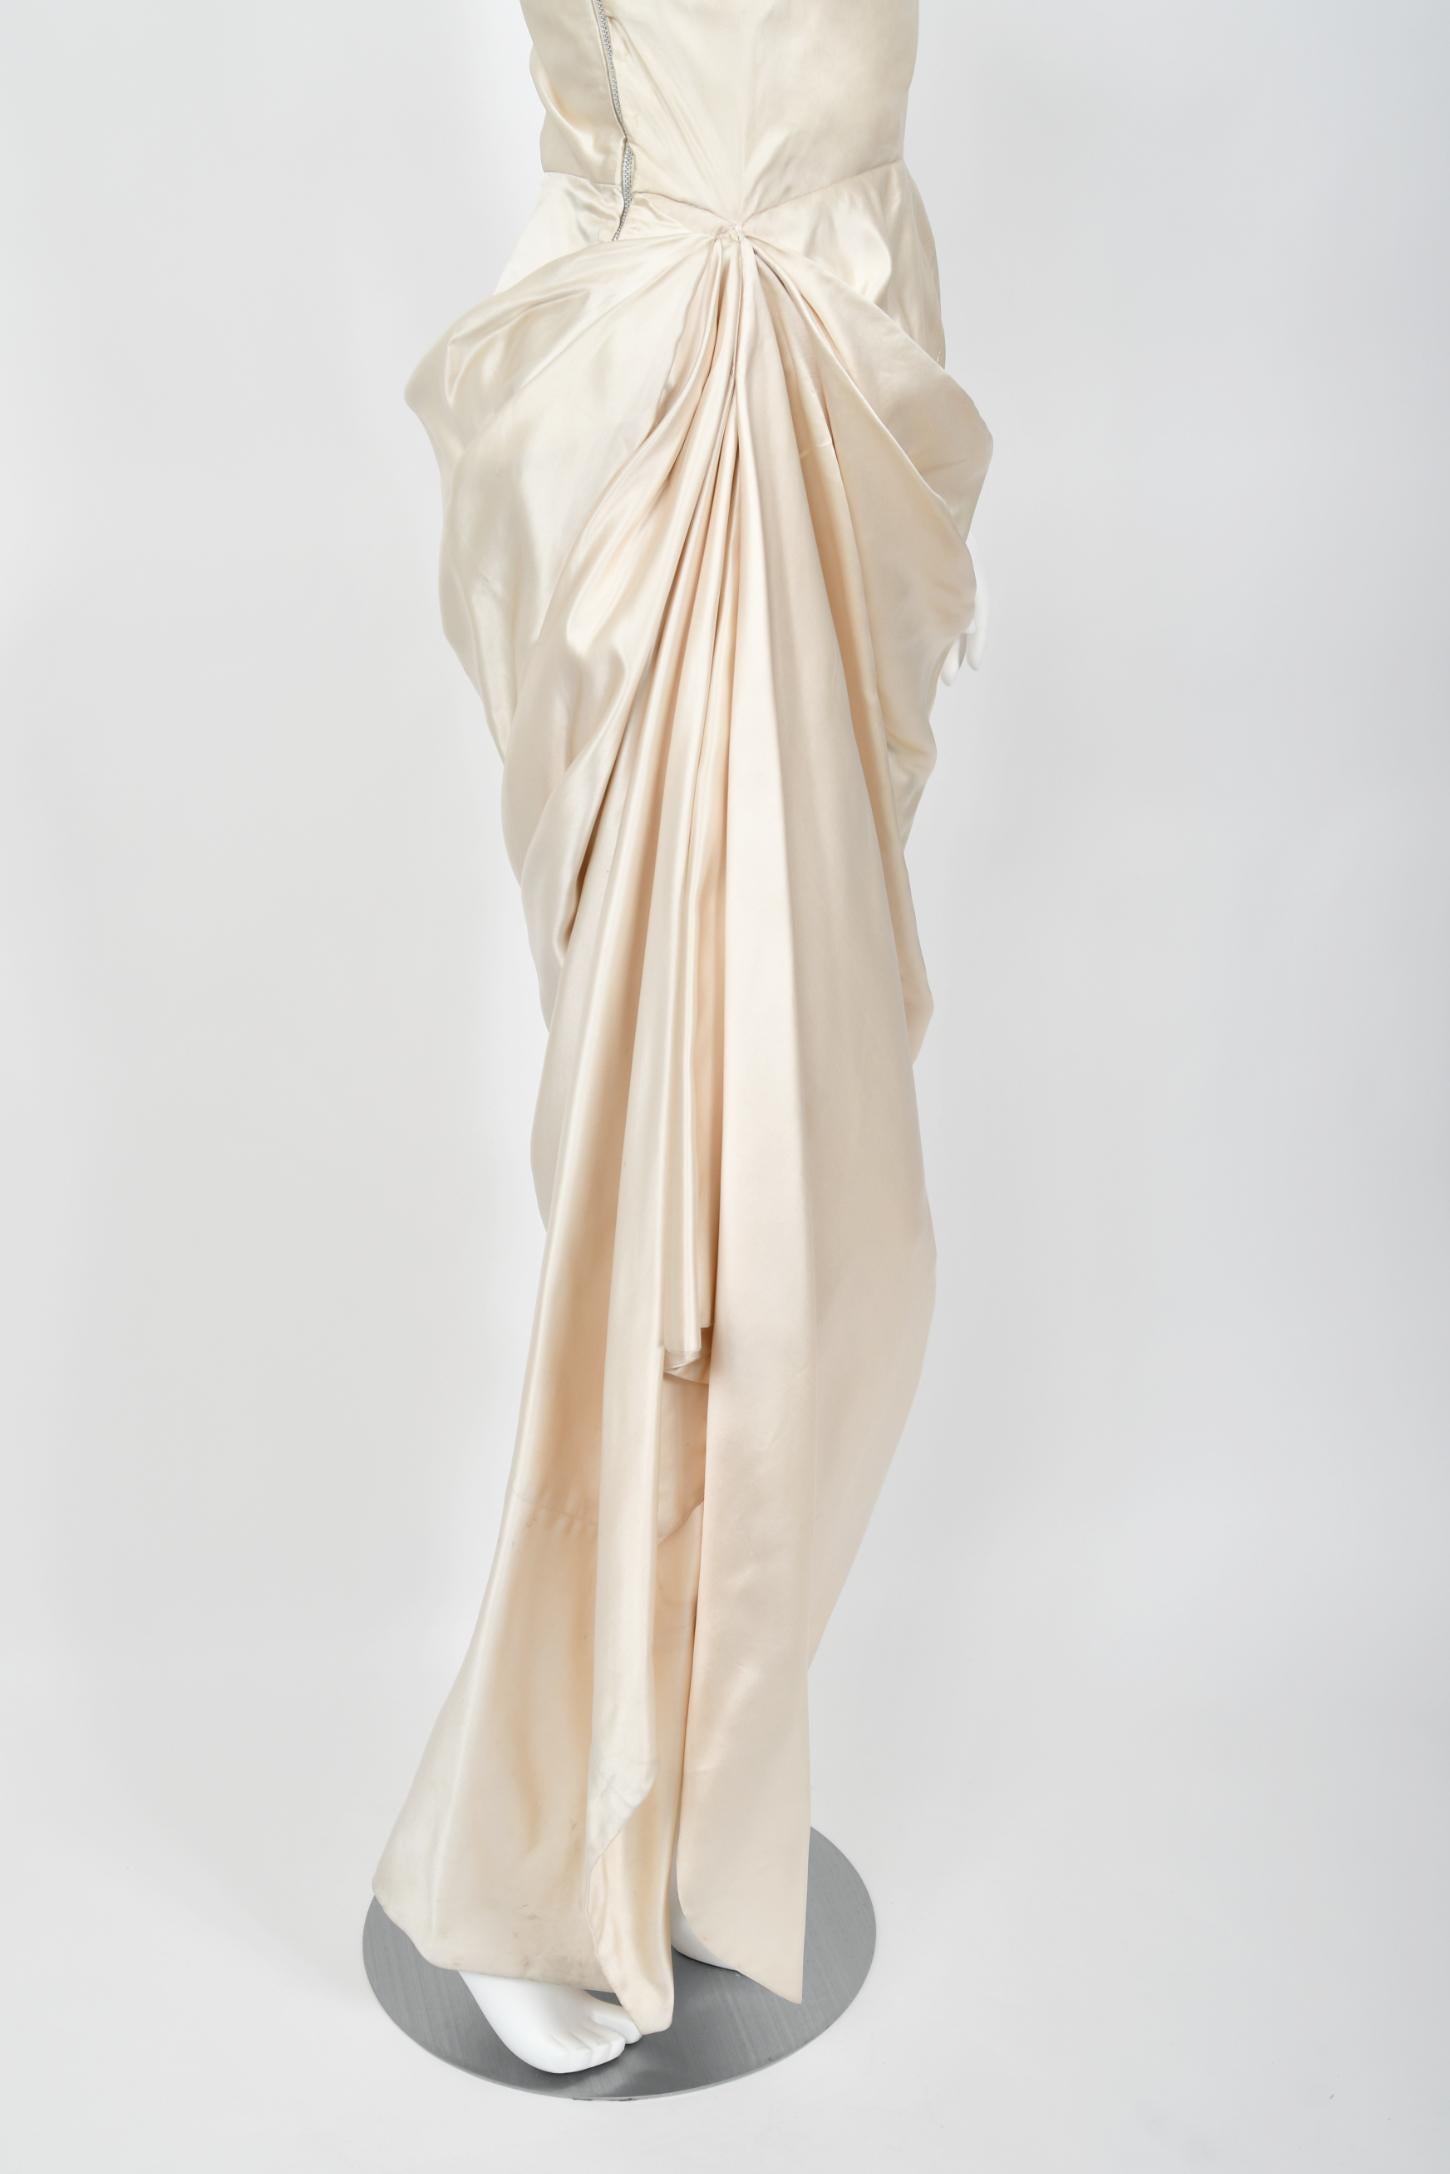 1949 Jeanne Lanvin Haute Couture Ivory Silk Satin Strapless Draped Bridal Gown  For Sale 6